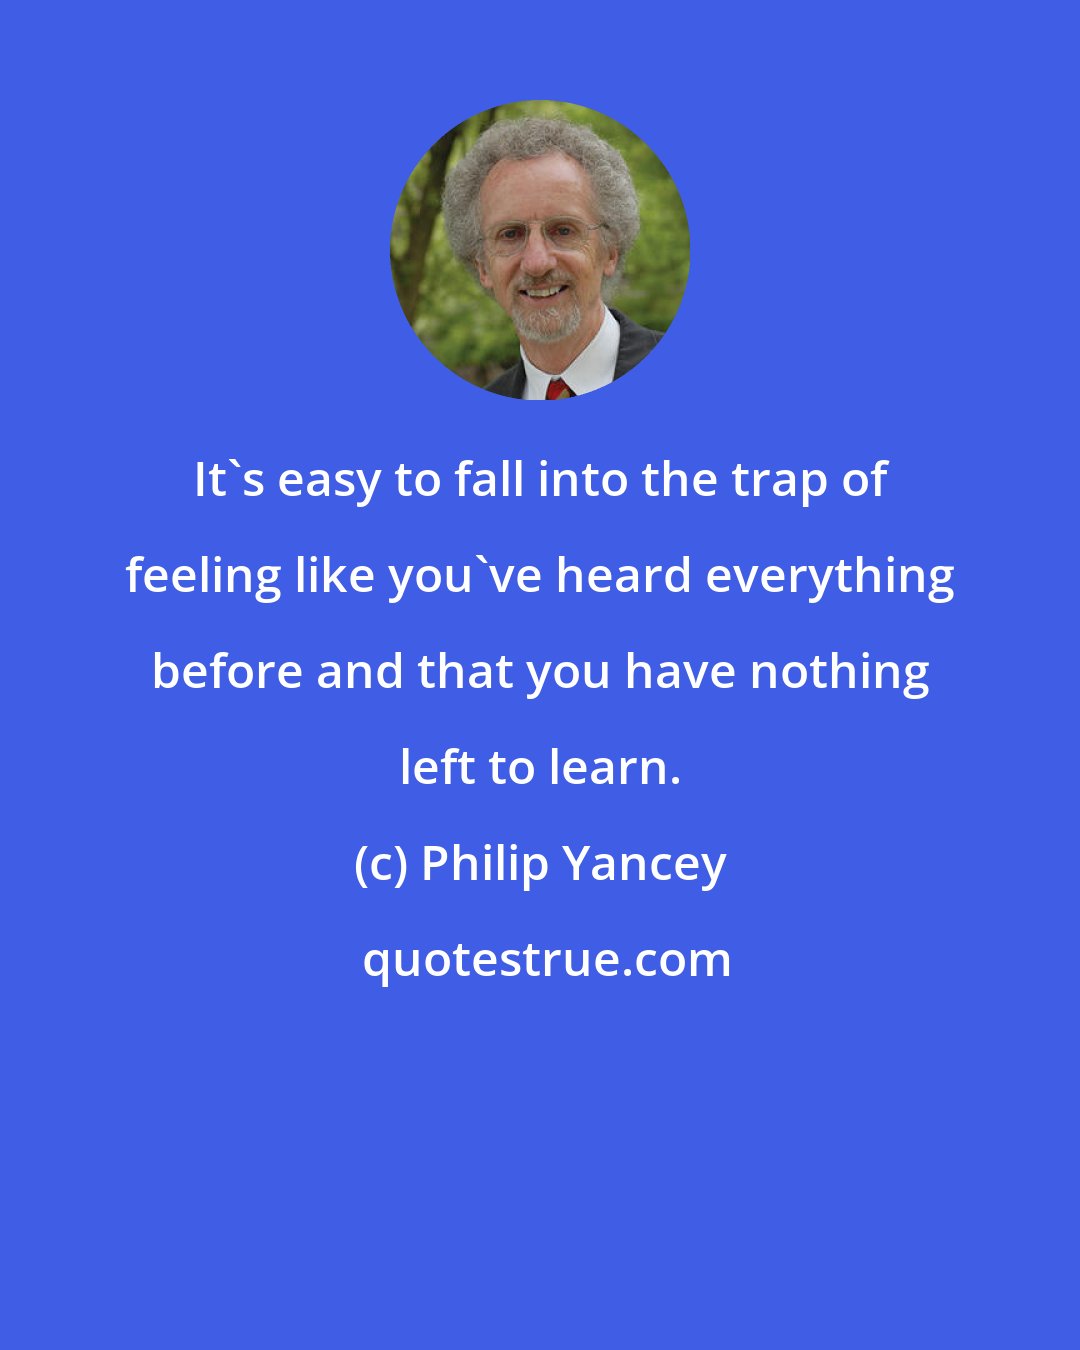 Philip Yancey: It's easy to fall into the trap of feeling like you've heard everything before and that you have nothing left to learn.